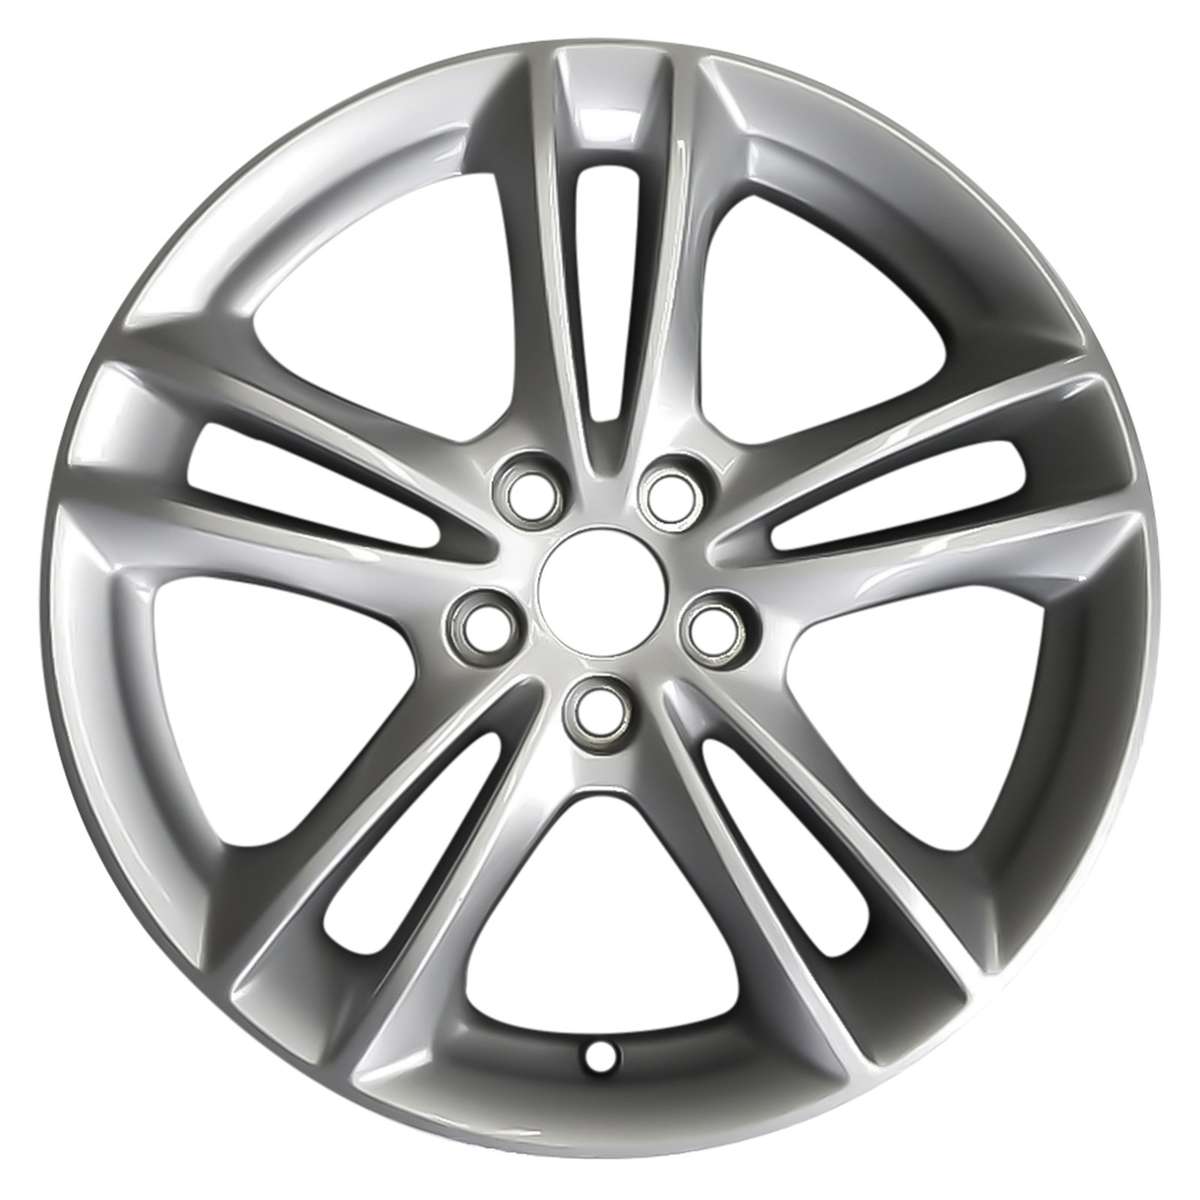 2019 Ford Fusion New 17" Replacement Wheel Rim RW3984S